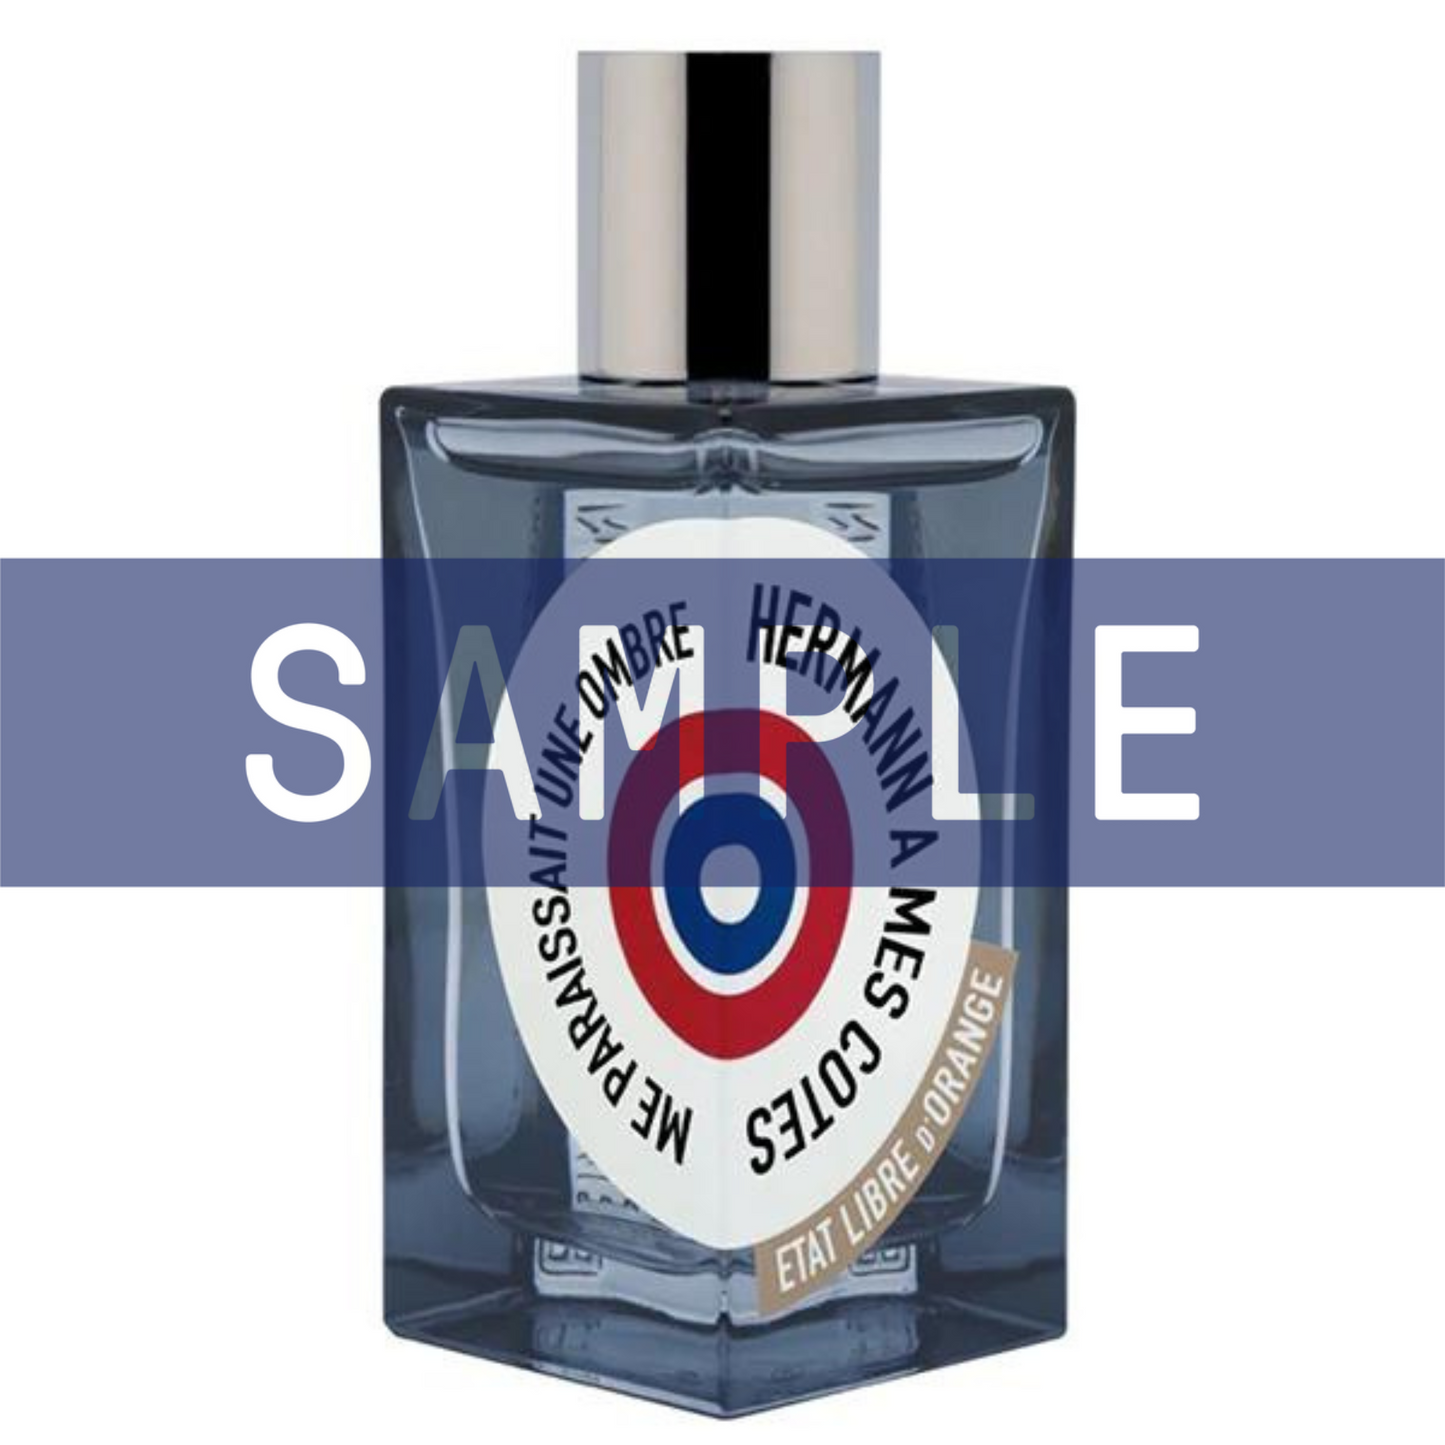 Primary Image of Sample - Hermann A Mes Cotes EDP